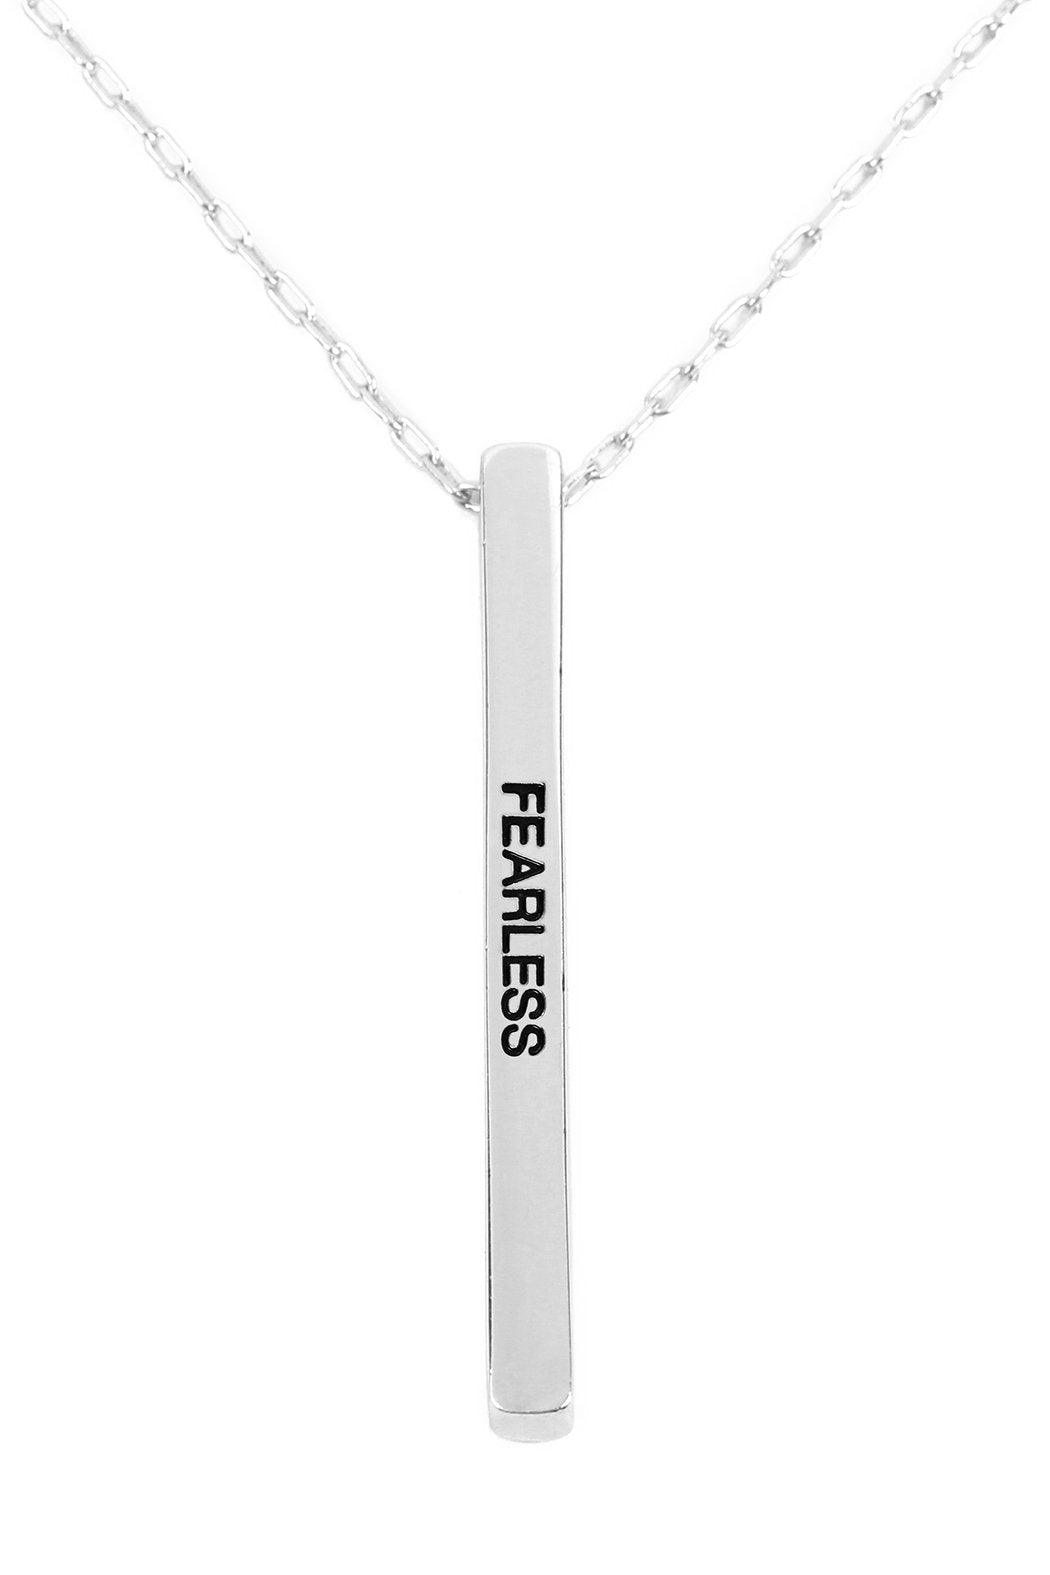 B3n2164fe - "Fearless" Metal Bar Pendant Chain Necklace - LOLA LUXE